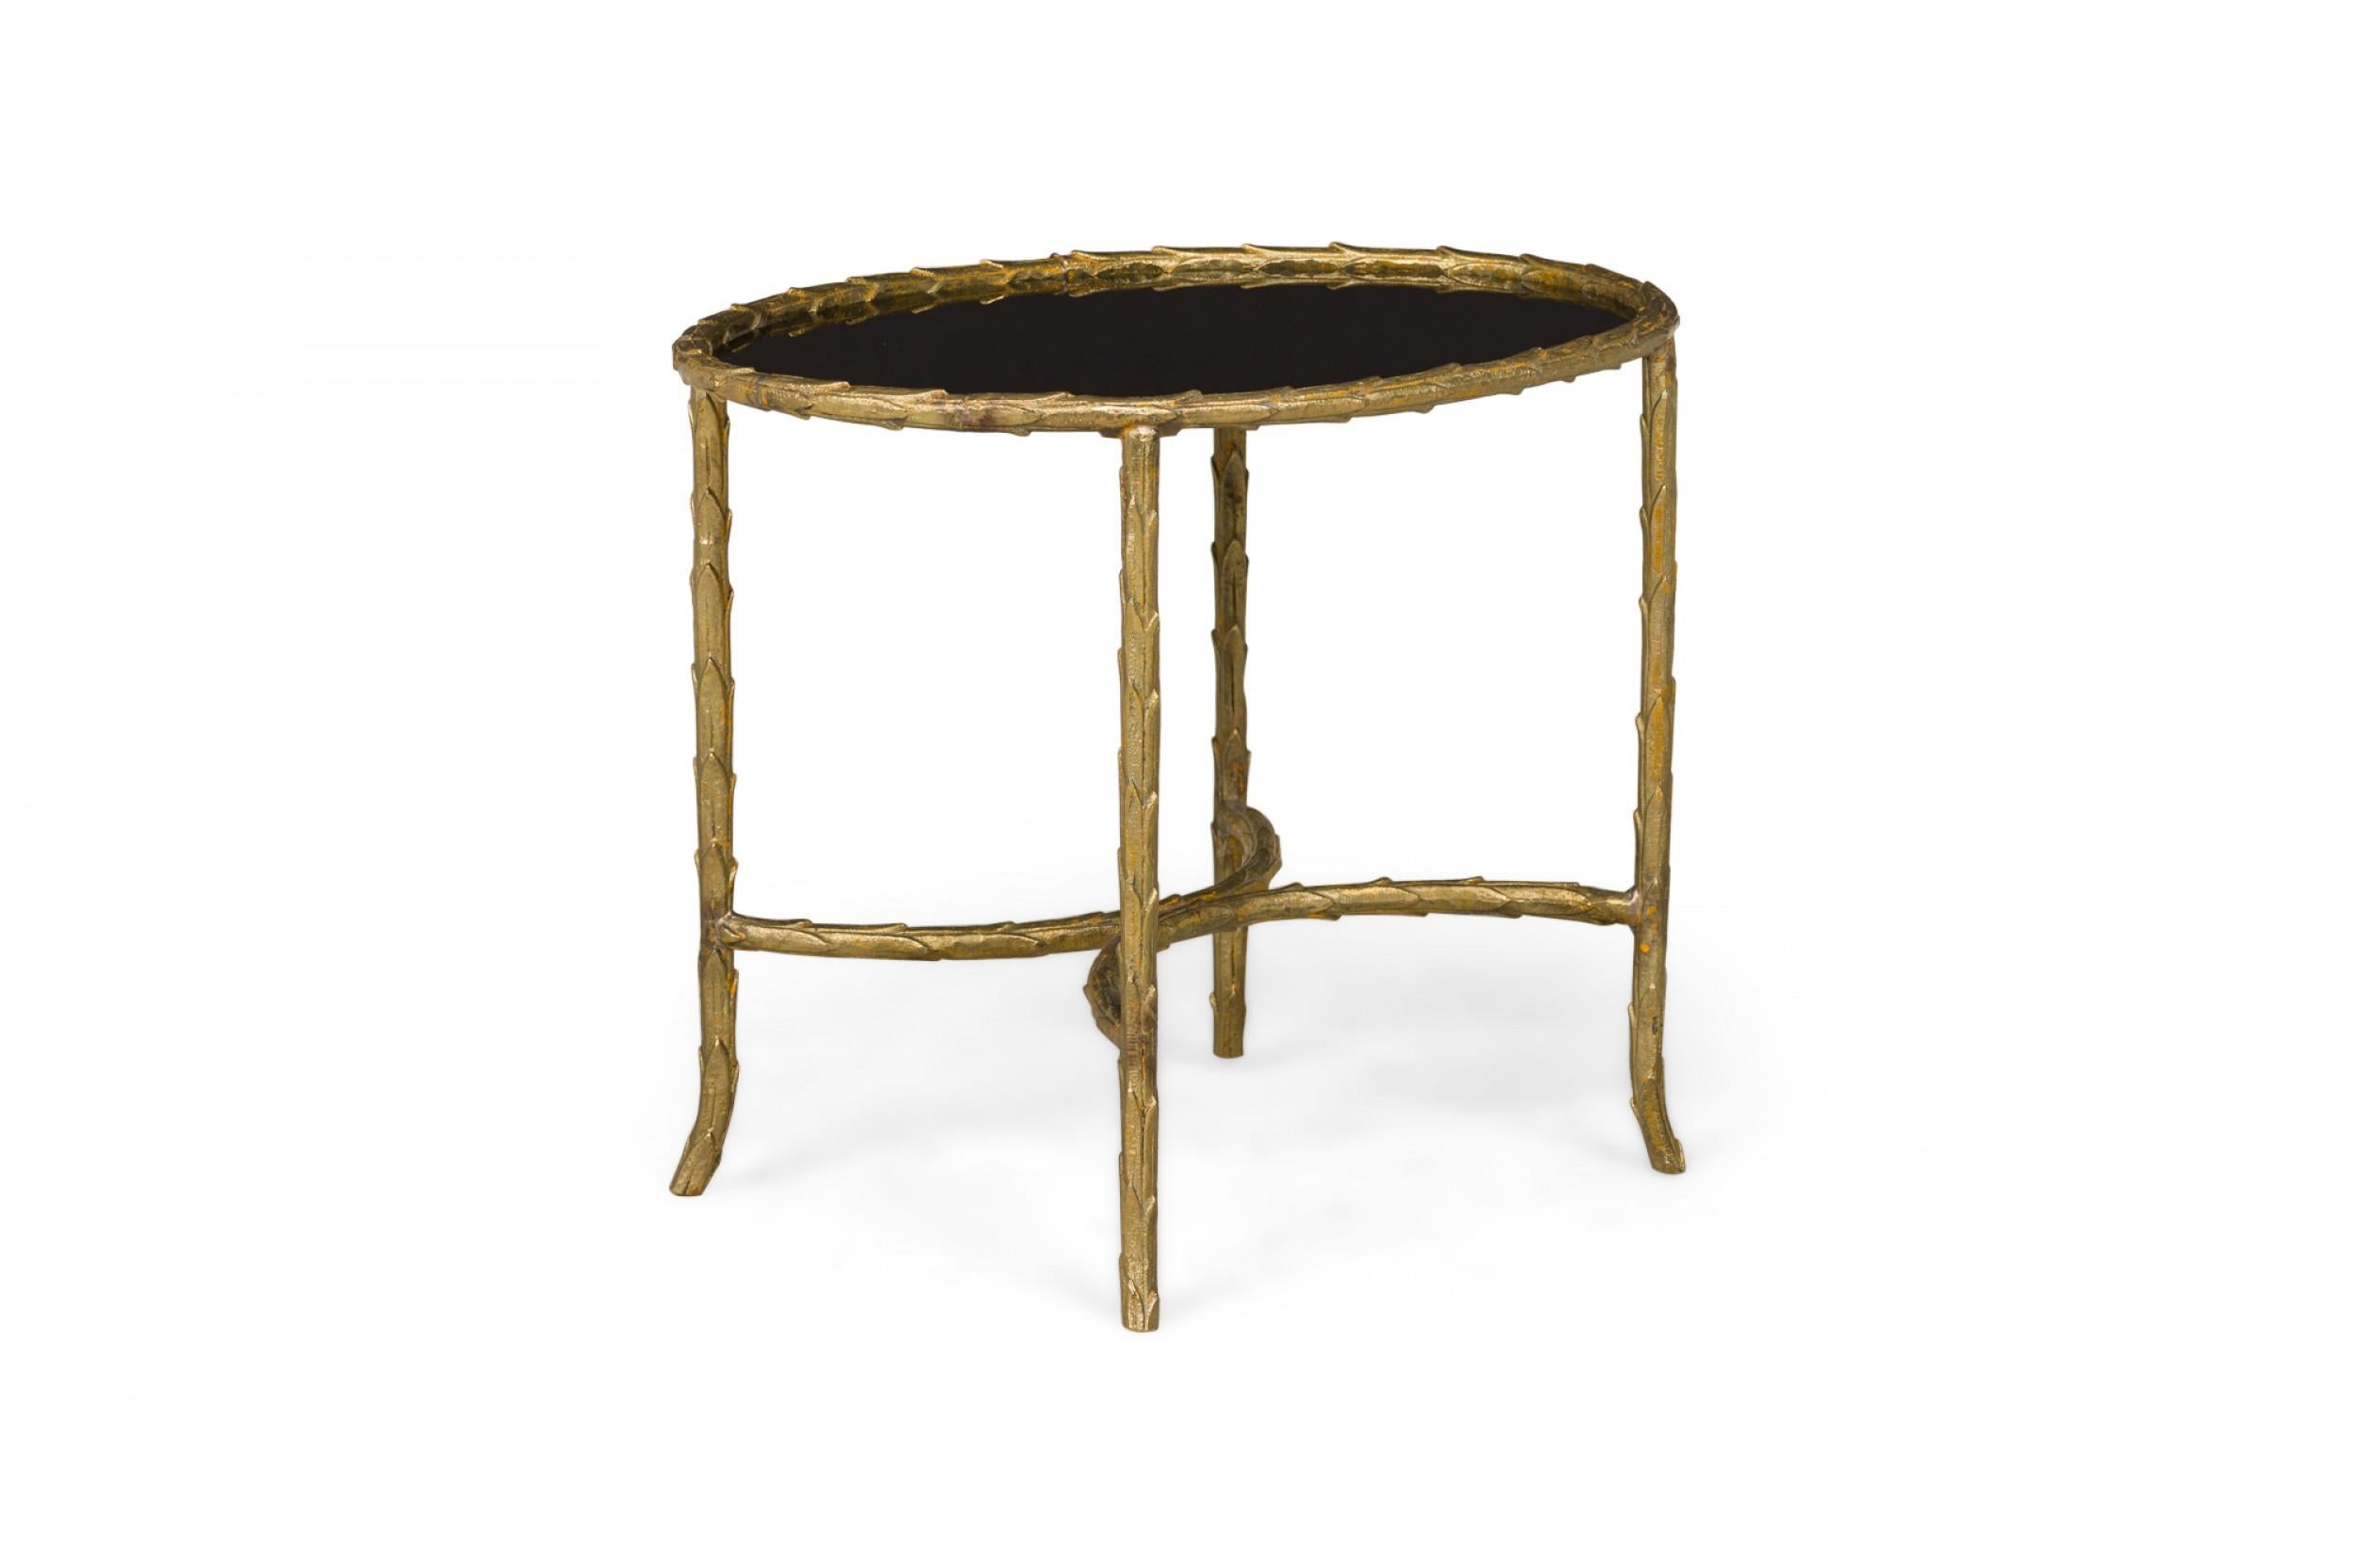 Art Deco French Gilt Bronze Faux Bamboo Oval End / Side Table with Black Glass In Good Condition For Sale In New York, NY